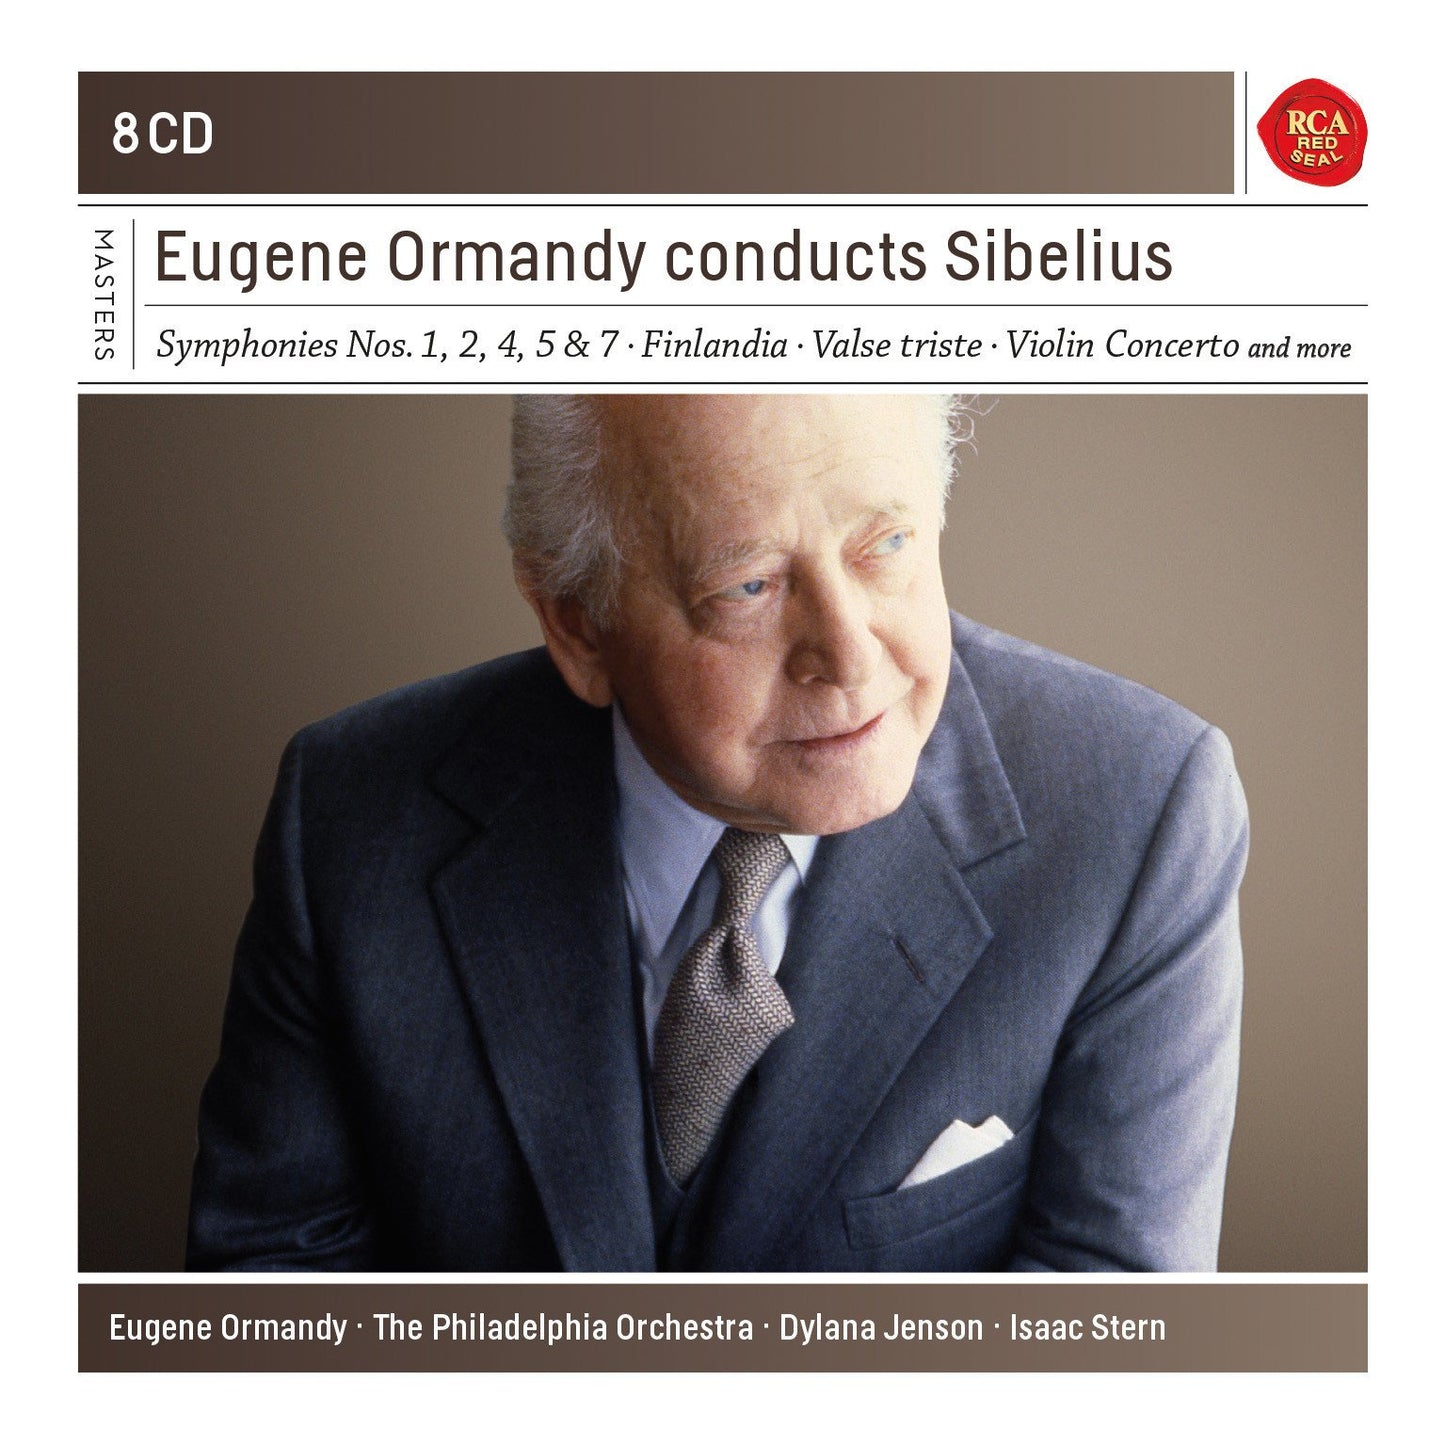 EUGENE ORMANDY CONDUCTS SIBELIUS (8 CDS)